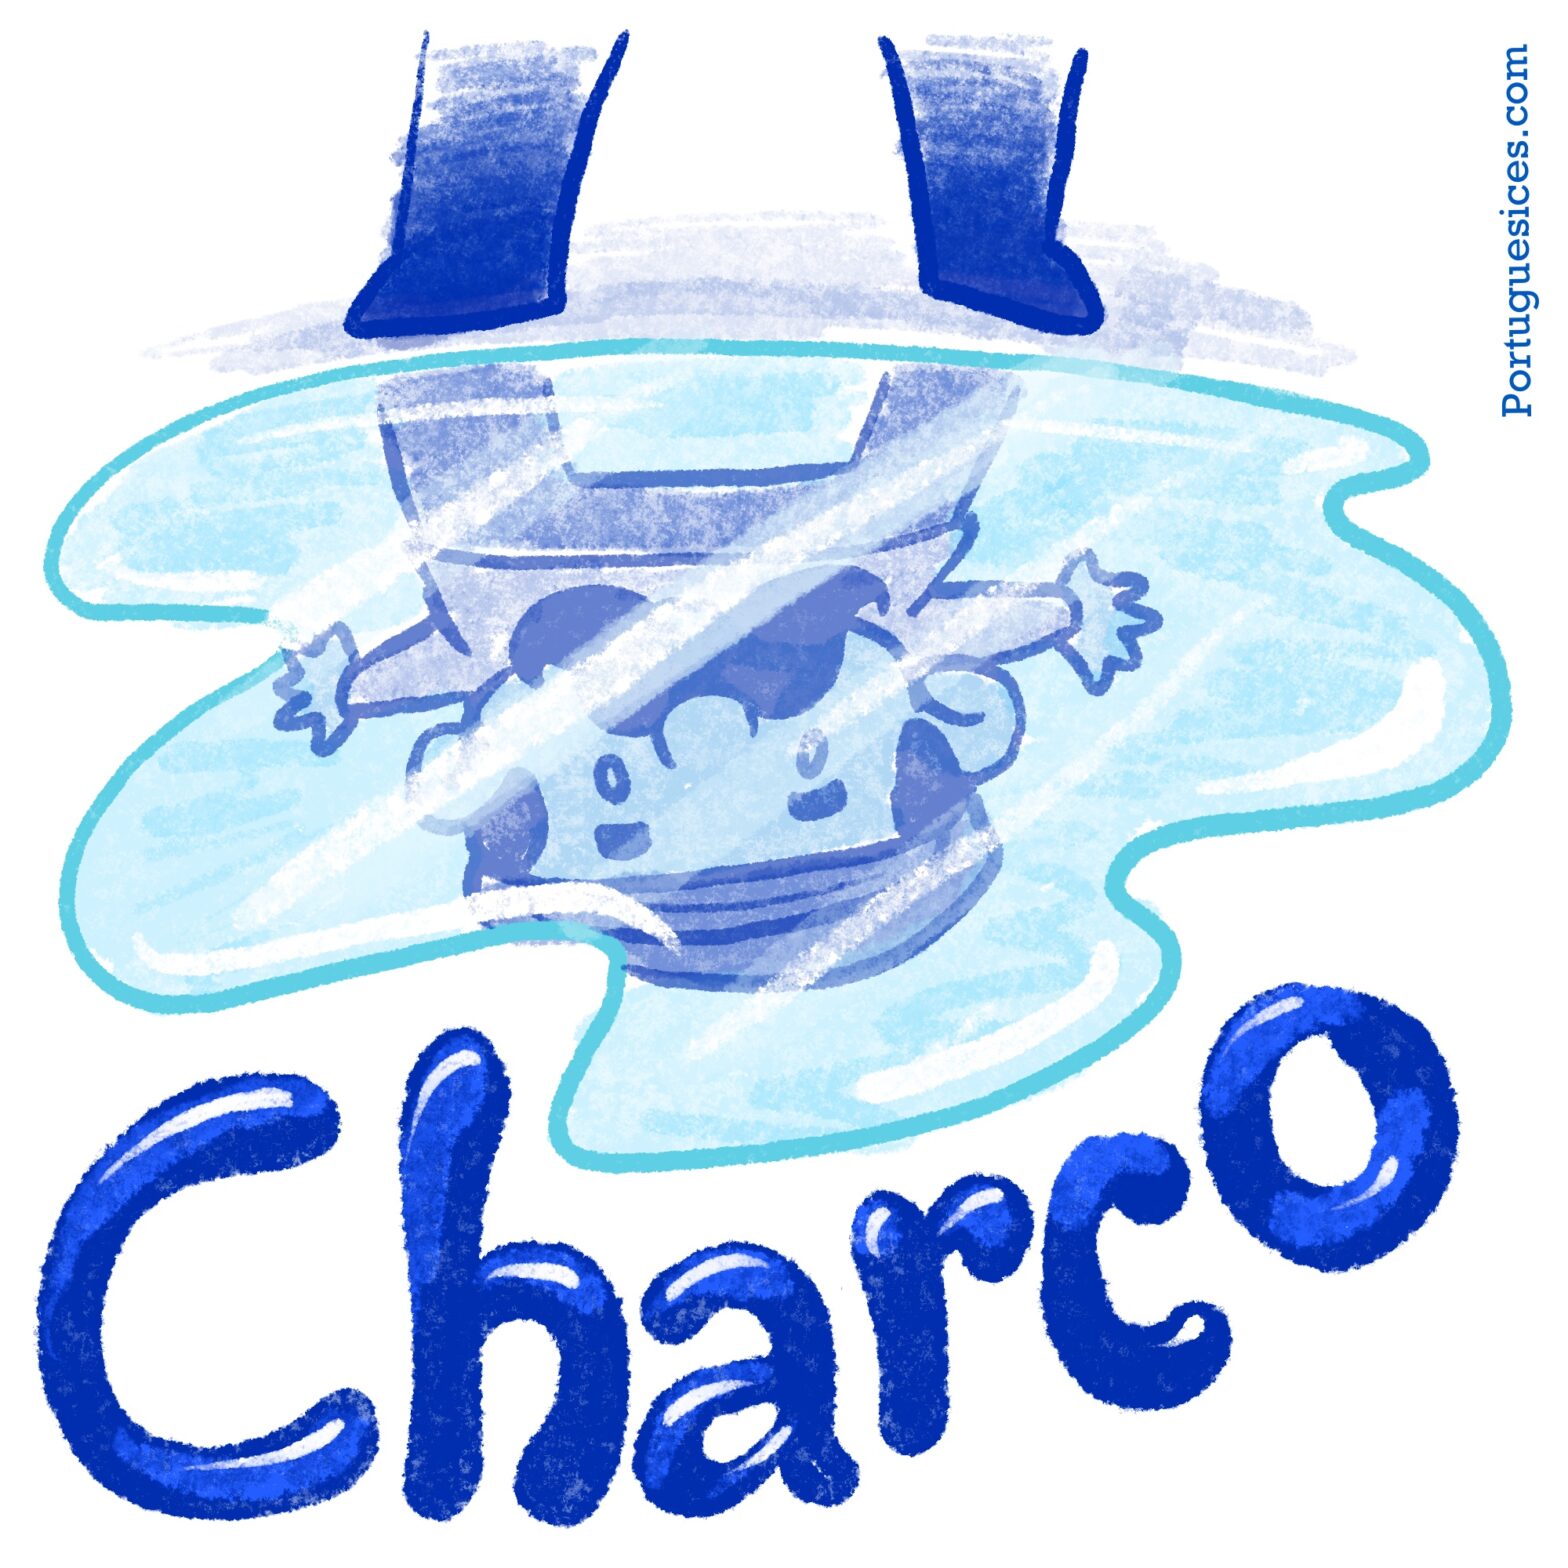 Charco